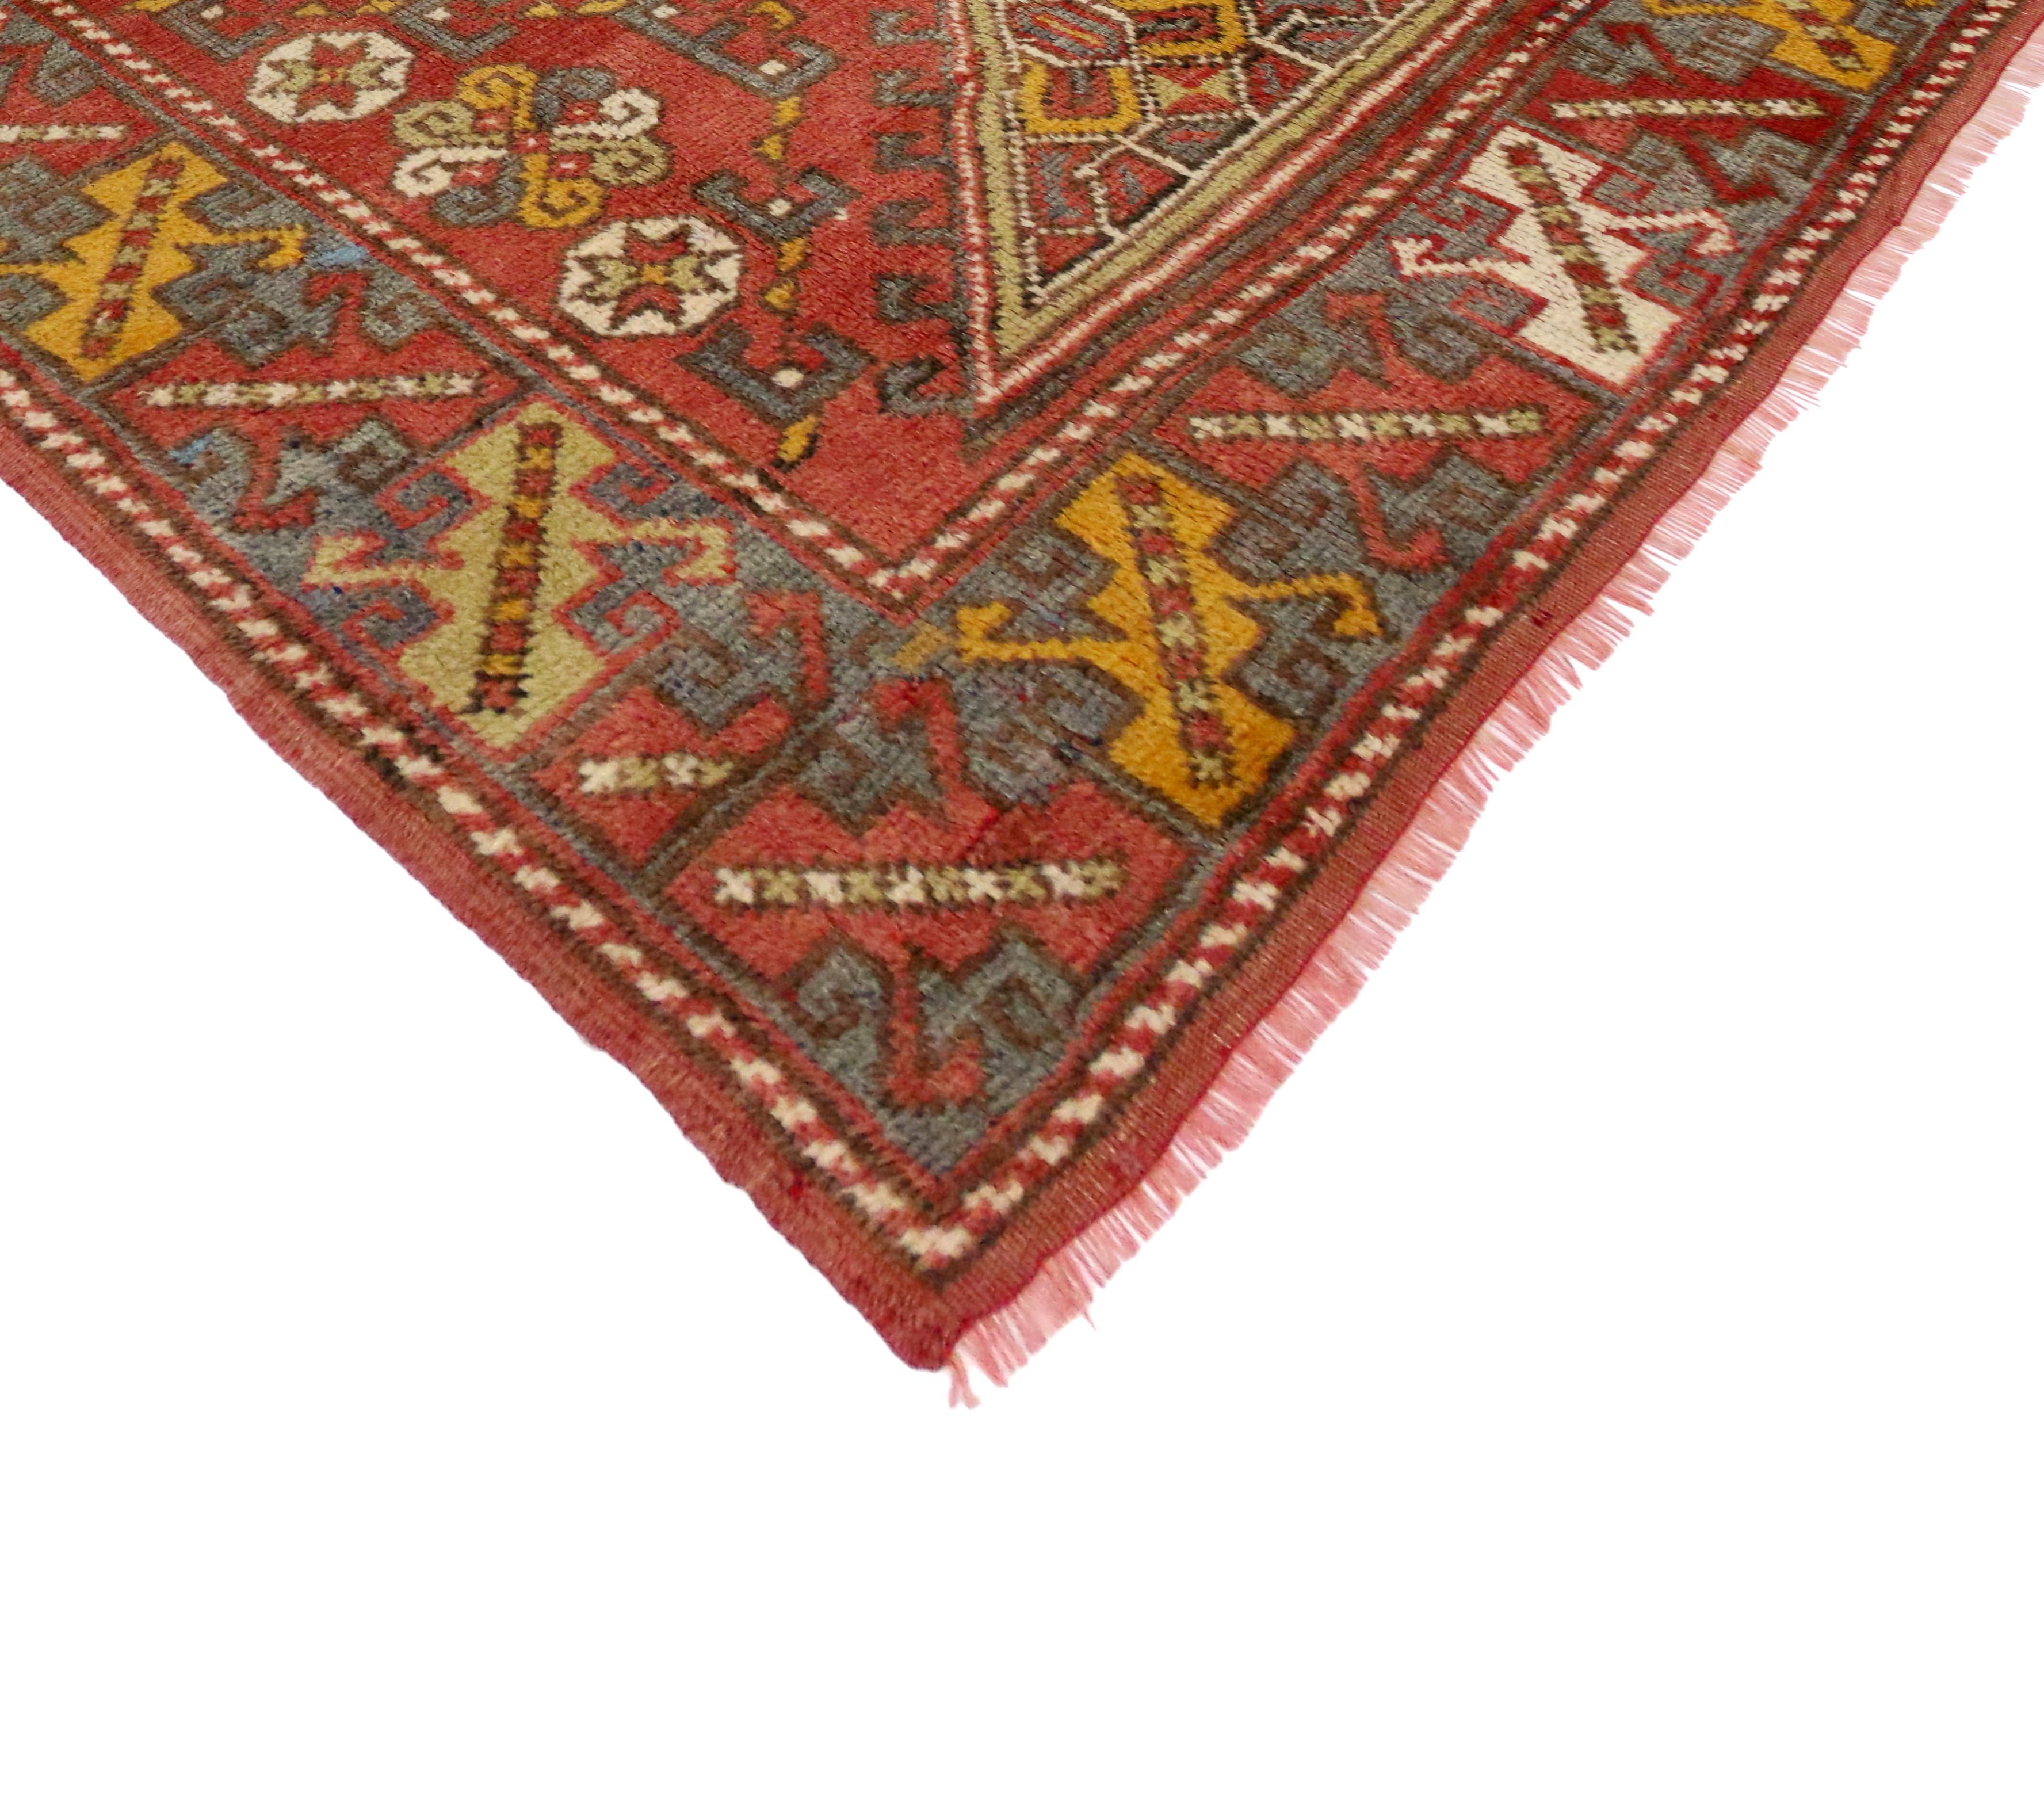 51213, vintage Turkish Oushak Accent rug, entry or foyer rug. This vintage Turkish Oushak rug features a modern traditional style. Immersed in Anatolian history and refined colors, this vintage Oushak rug combines simplicity with sophistication.